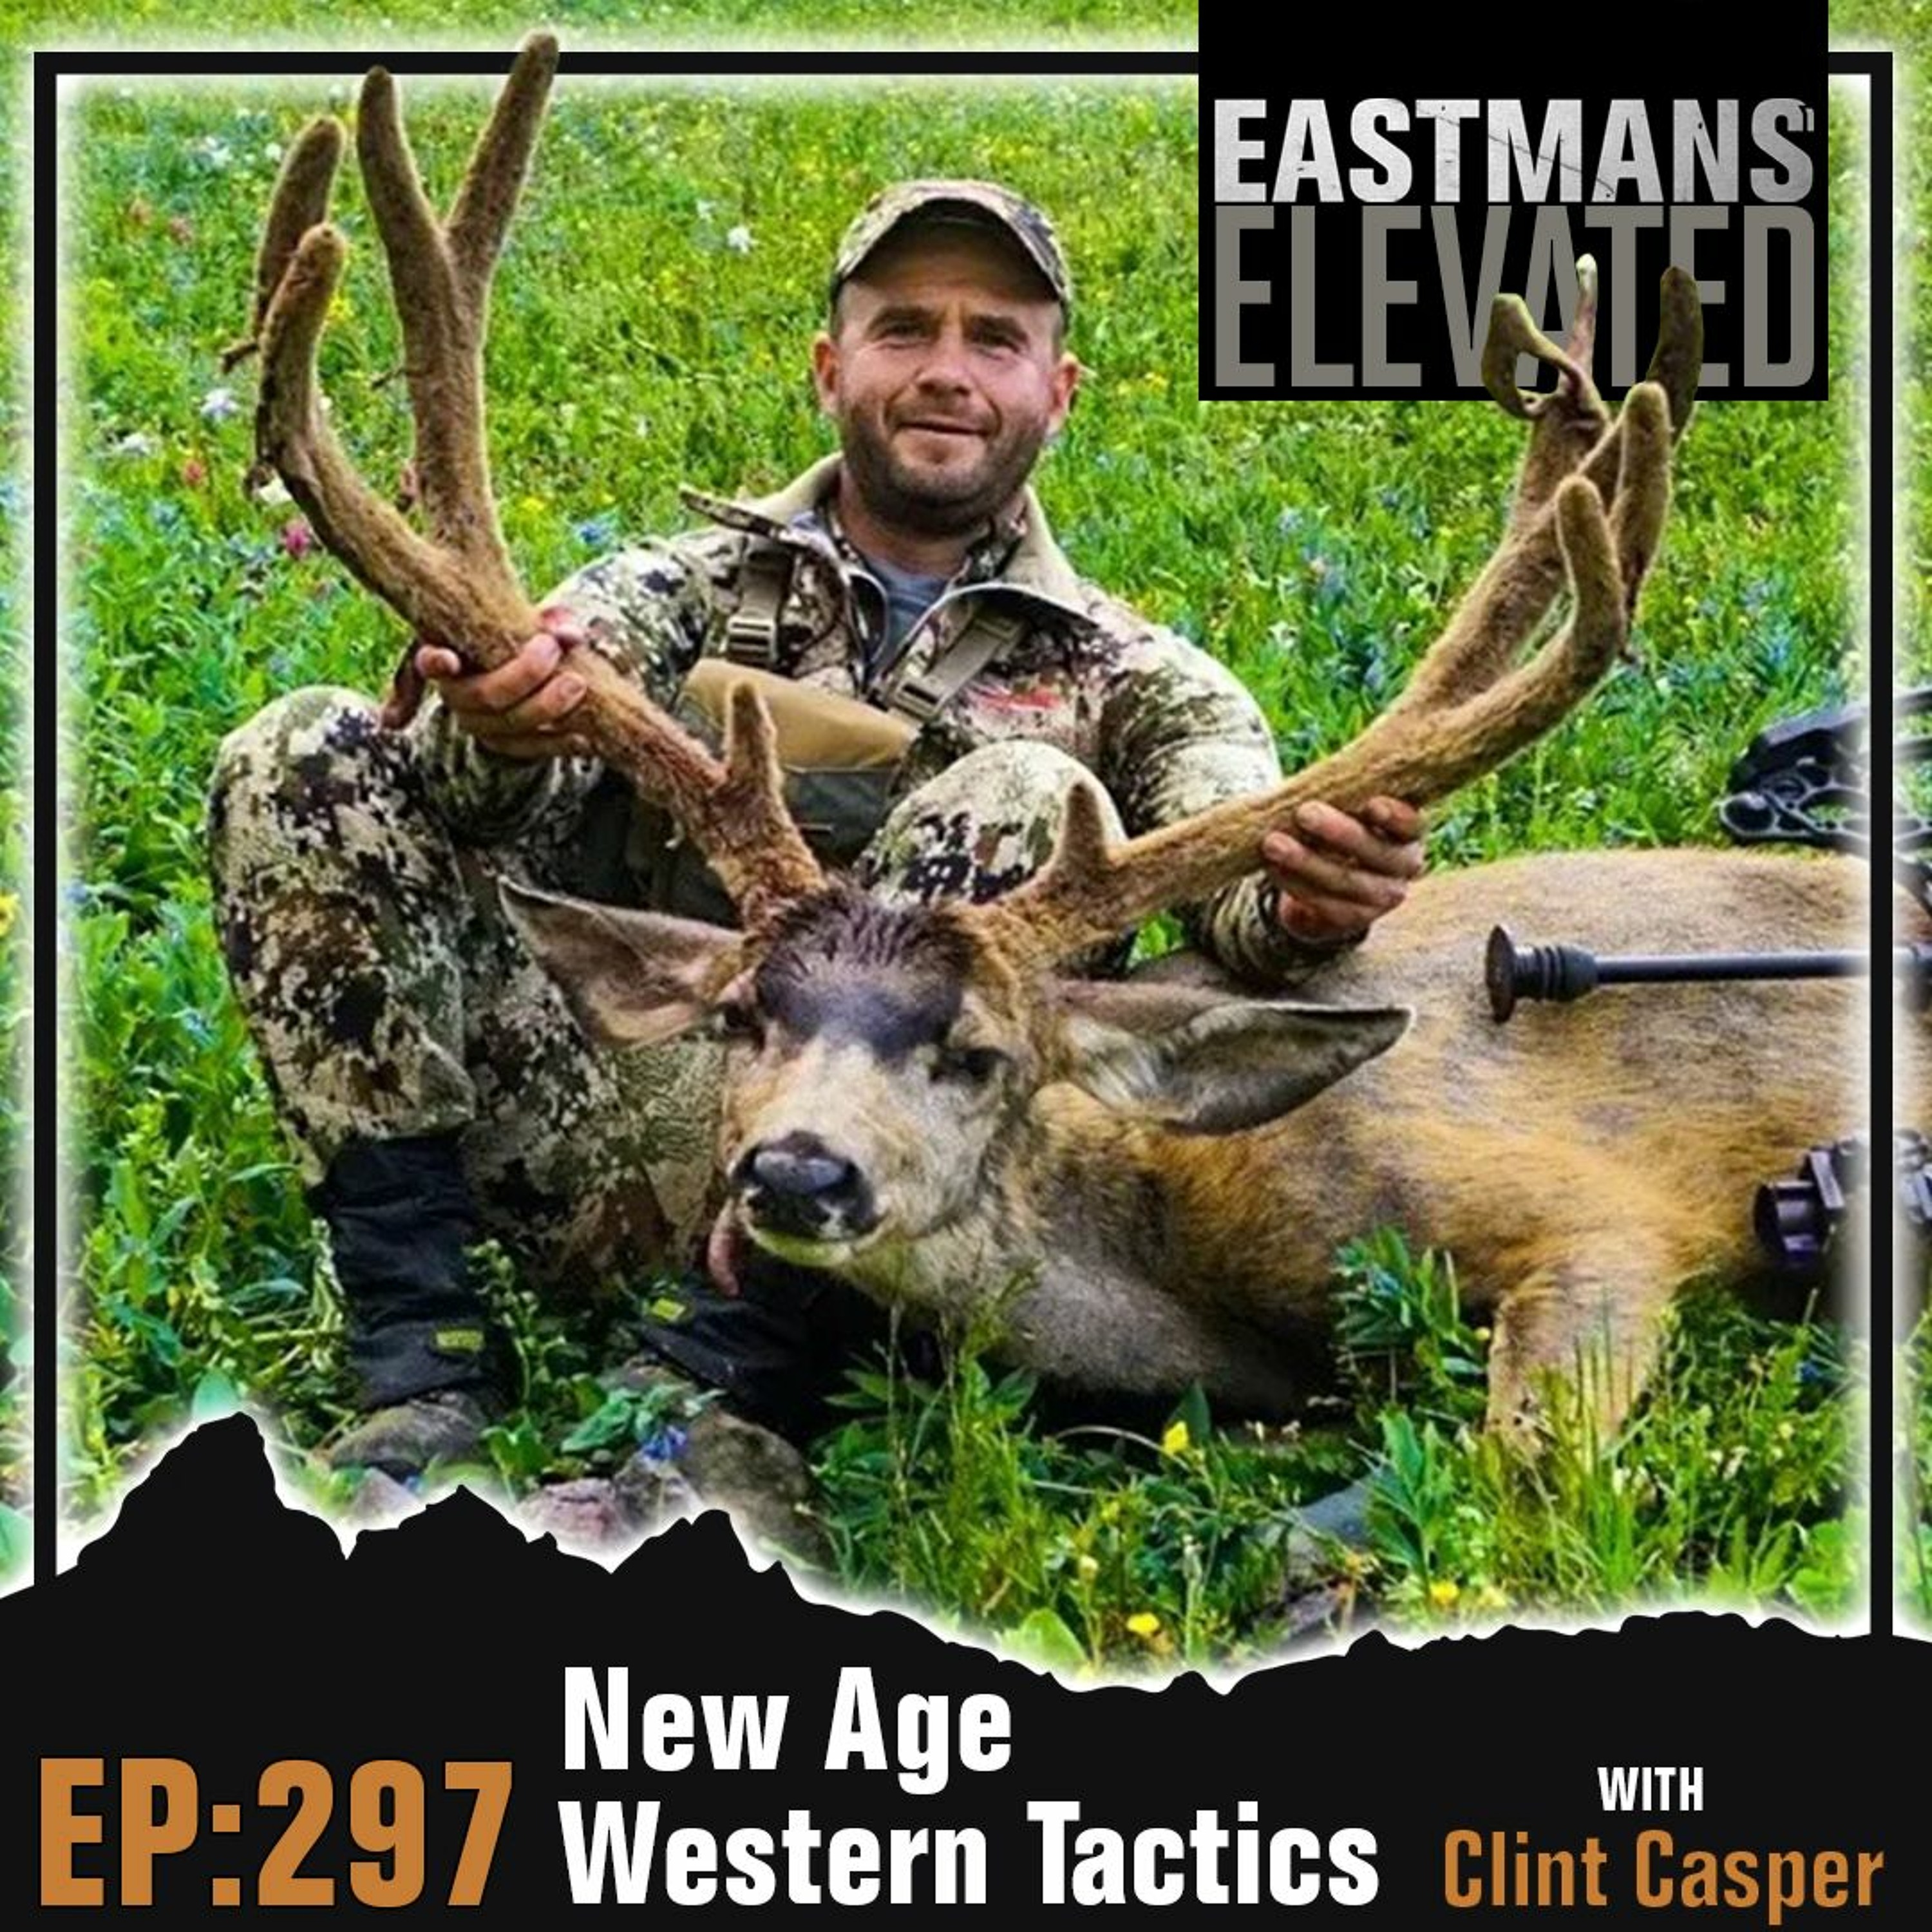 Episode 297: New Age Western Tactics with Clint Casper